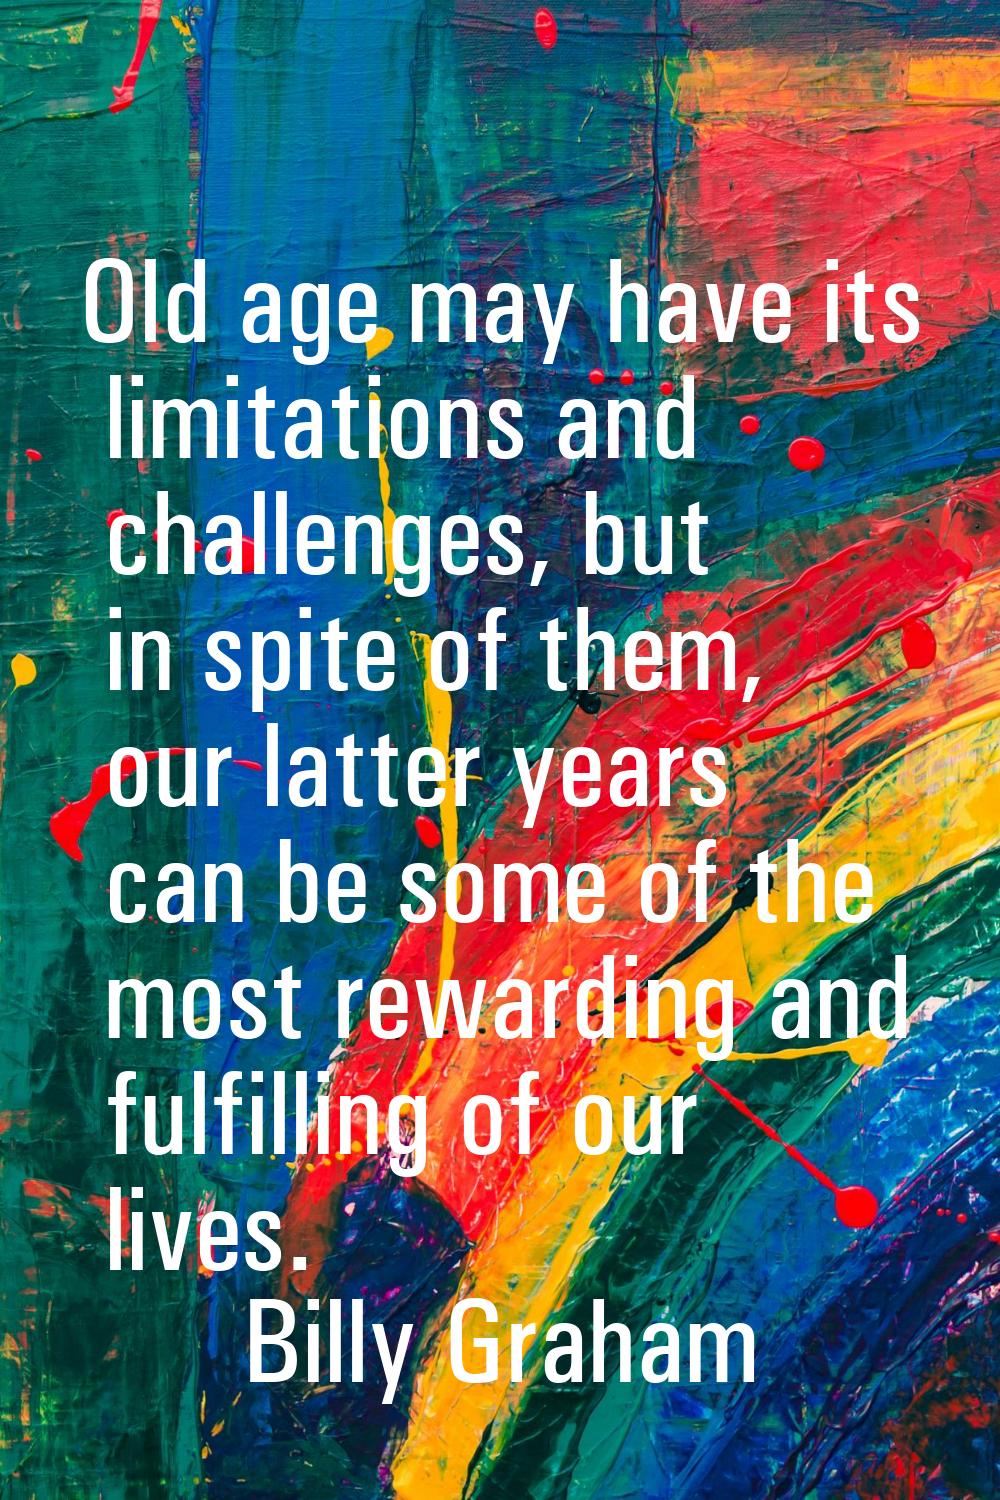 Old age may have its limitations and challenges, but in spite of them, our latter years can be some